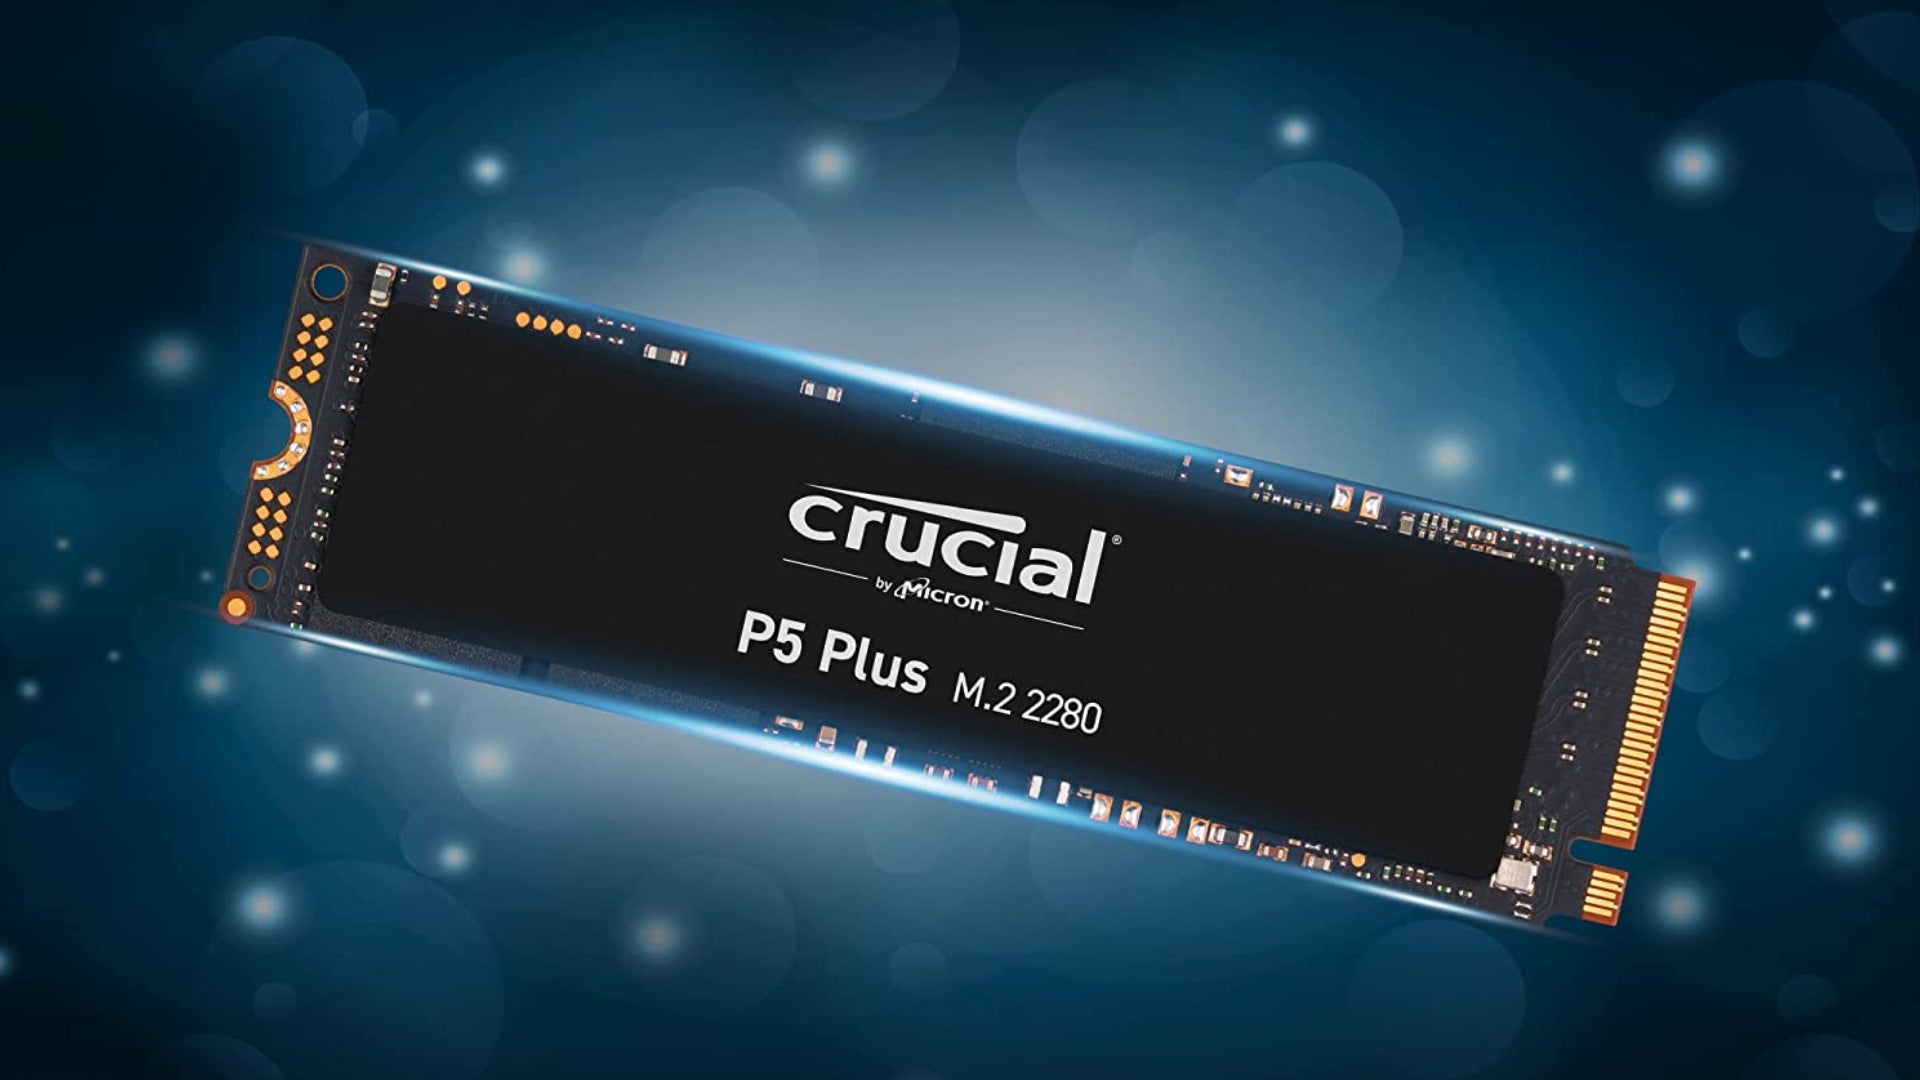 Image for Save £36 on this Crucial P5 Plus 1TB SSD from Amazon